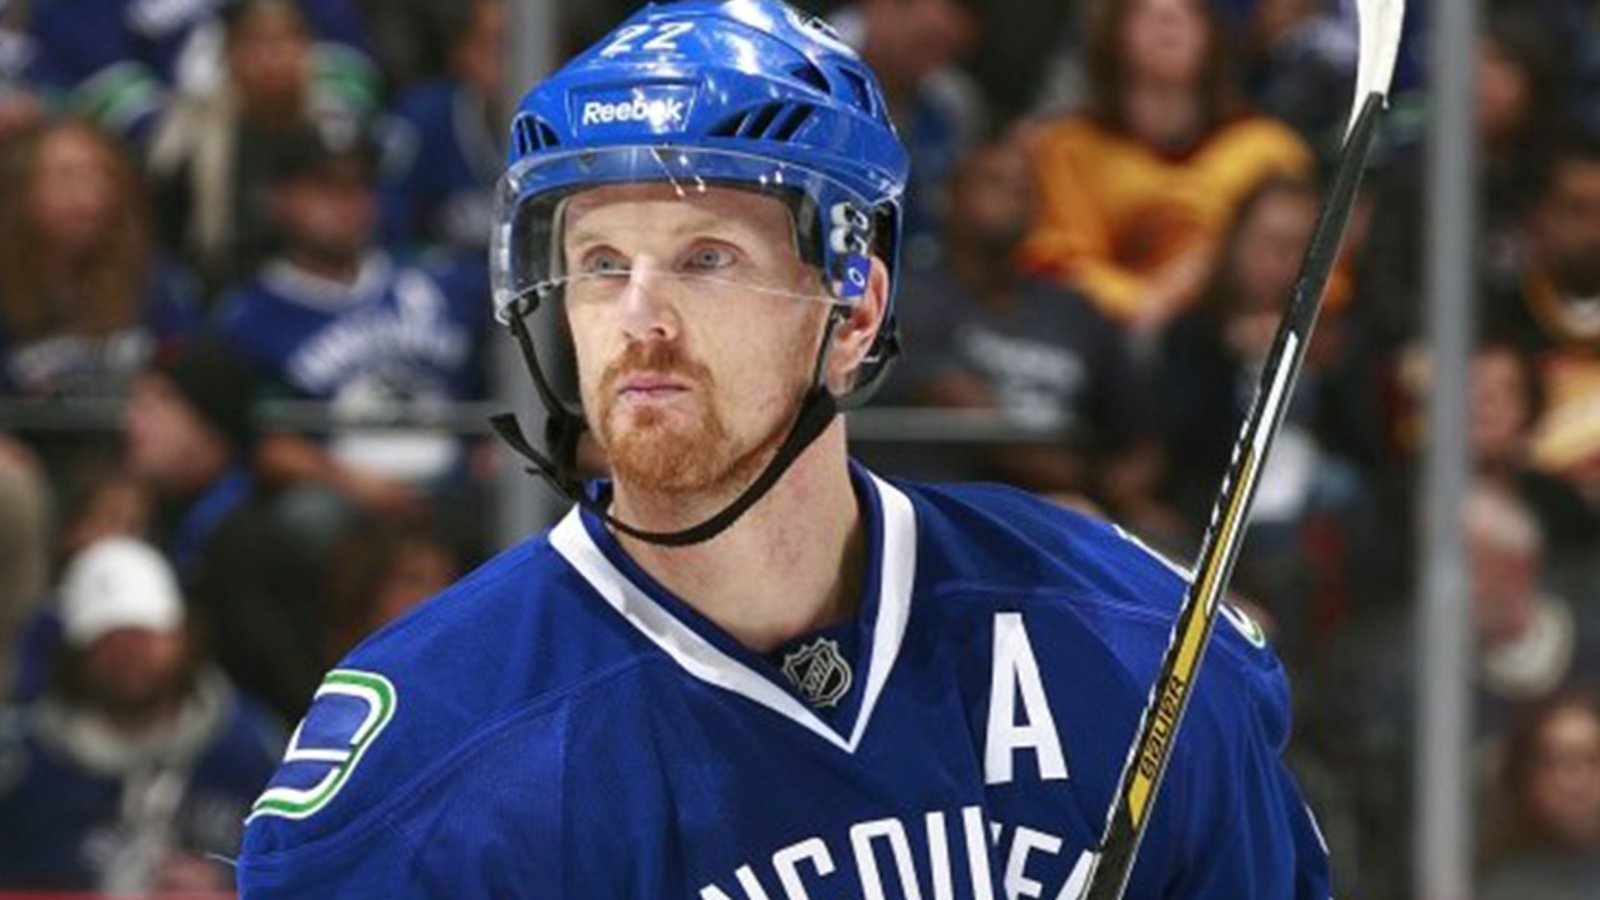 Daniel Sedin sounds off about new role with Vancouver Canucks management 